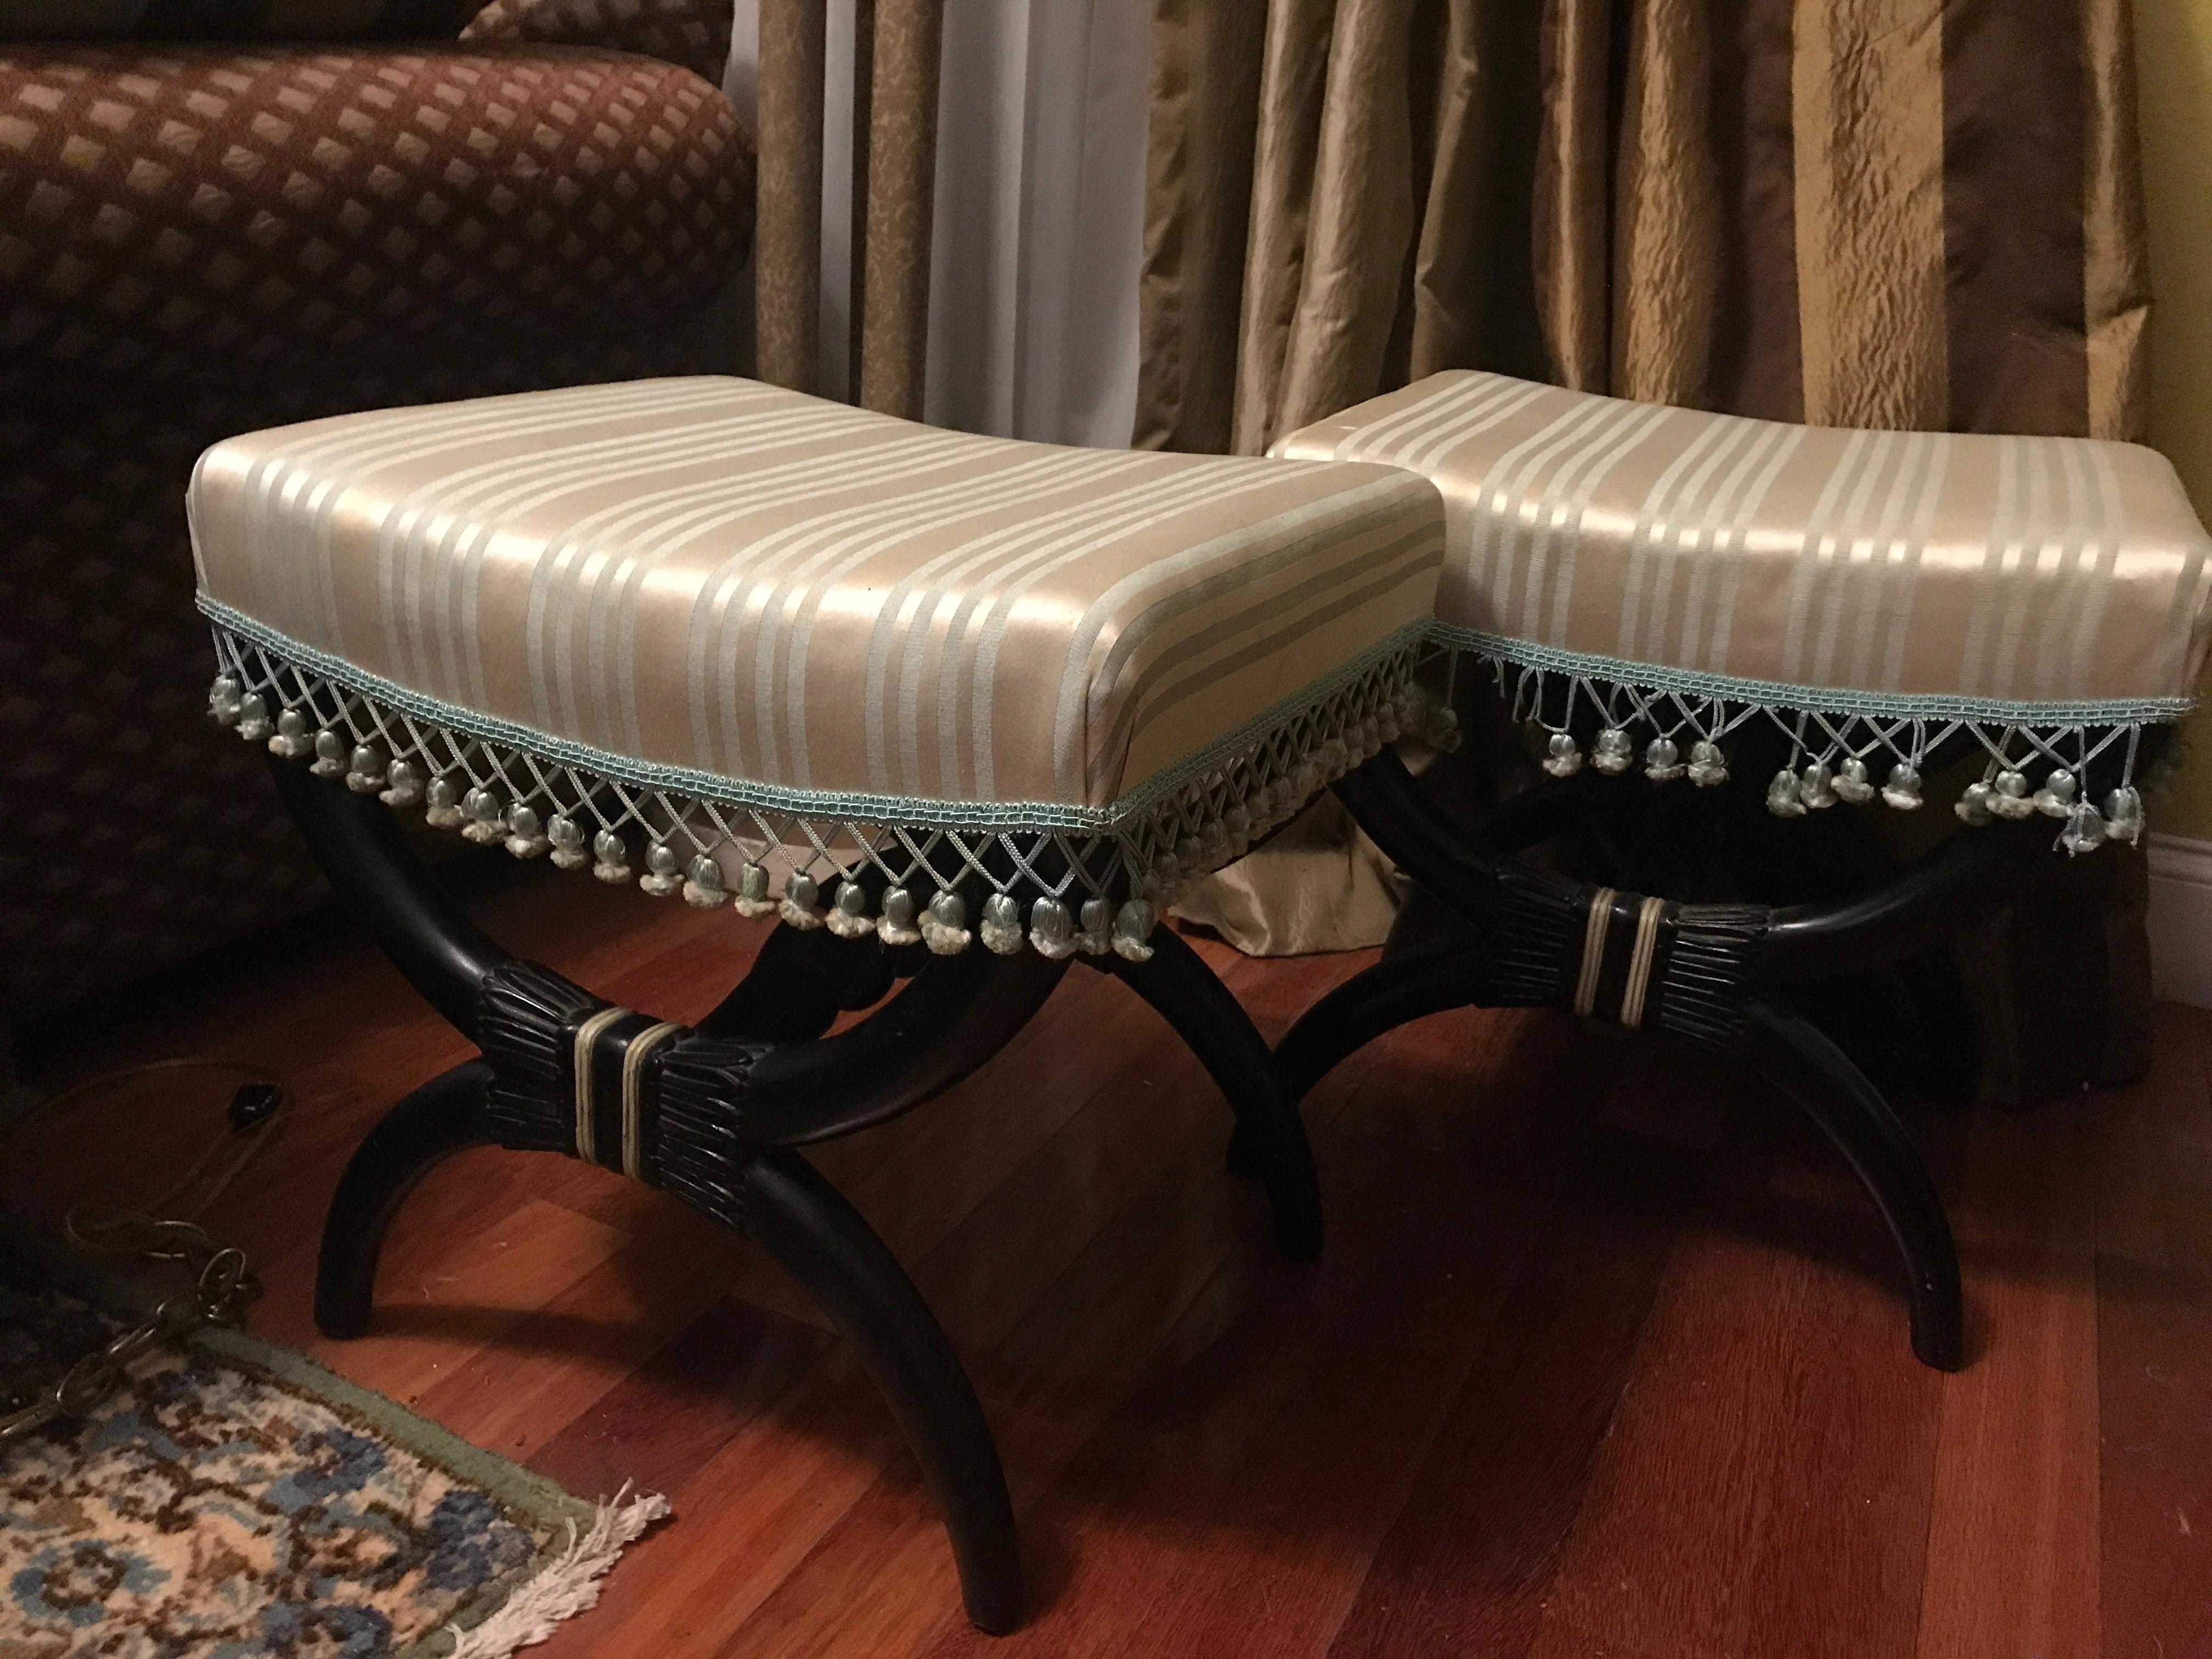 Silk fabric in cerulean blue and egg-shell combines with whimsical trim that accents the deep tone wood of two curule benches in black, a pair in the neoclassical style, ebonized and upholstered in silk. The pair is American or European, late 19th/